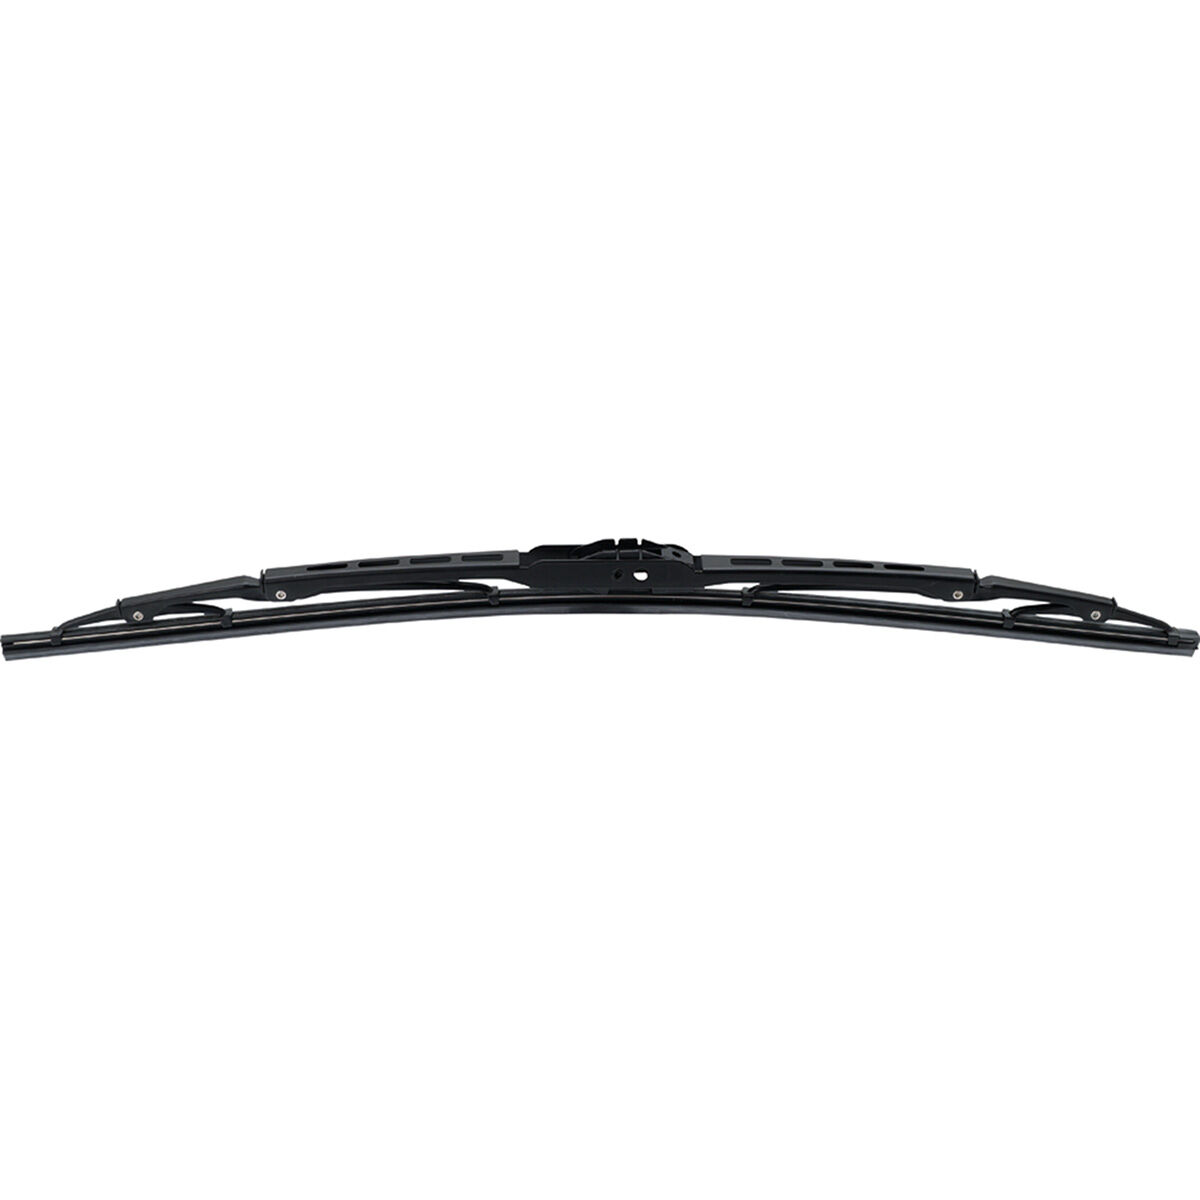 Lucas Wipers 21" std blade with spoiler 530 mm LWCS21 Replace SP21/19AS,SP21/19S 